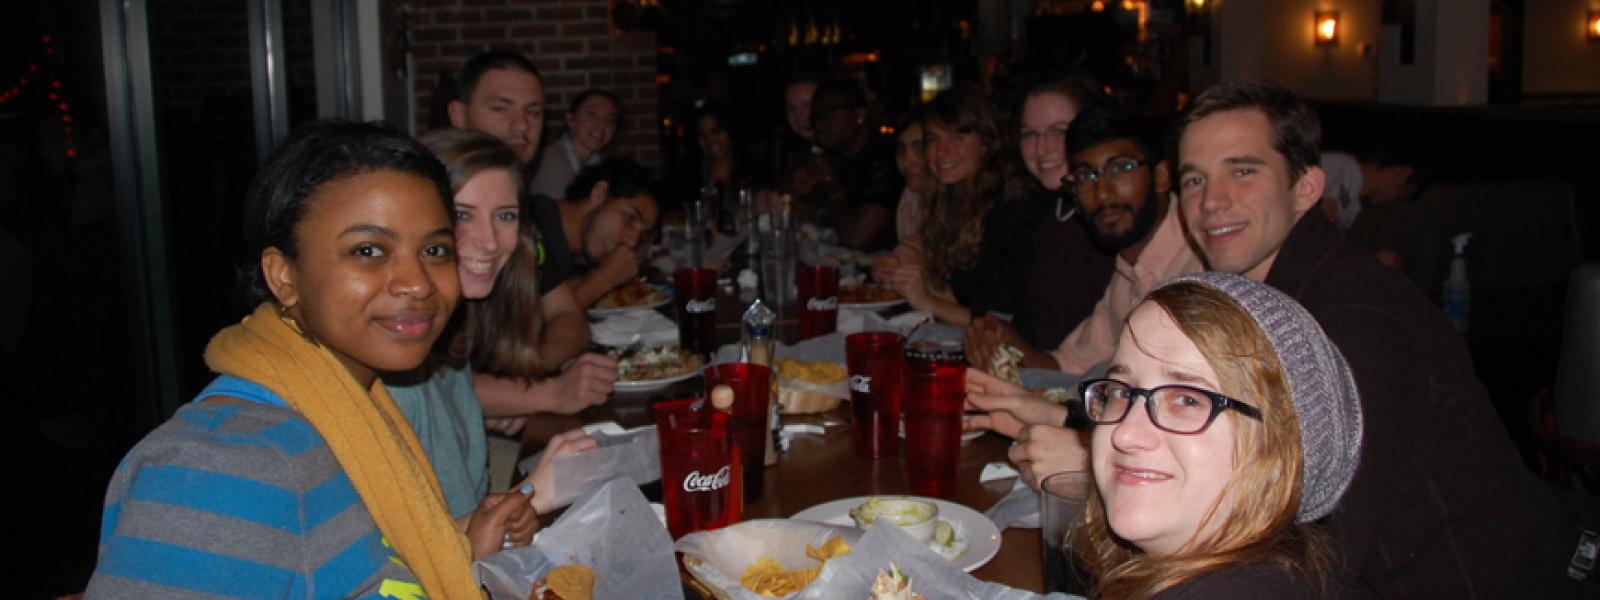 CIU students dining at a restaurant in downtown Columbia.